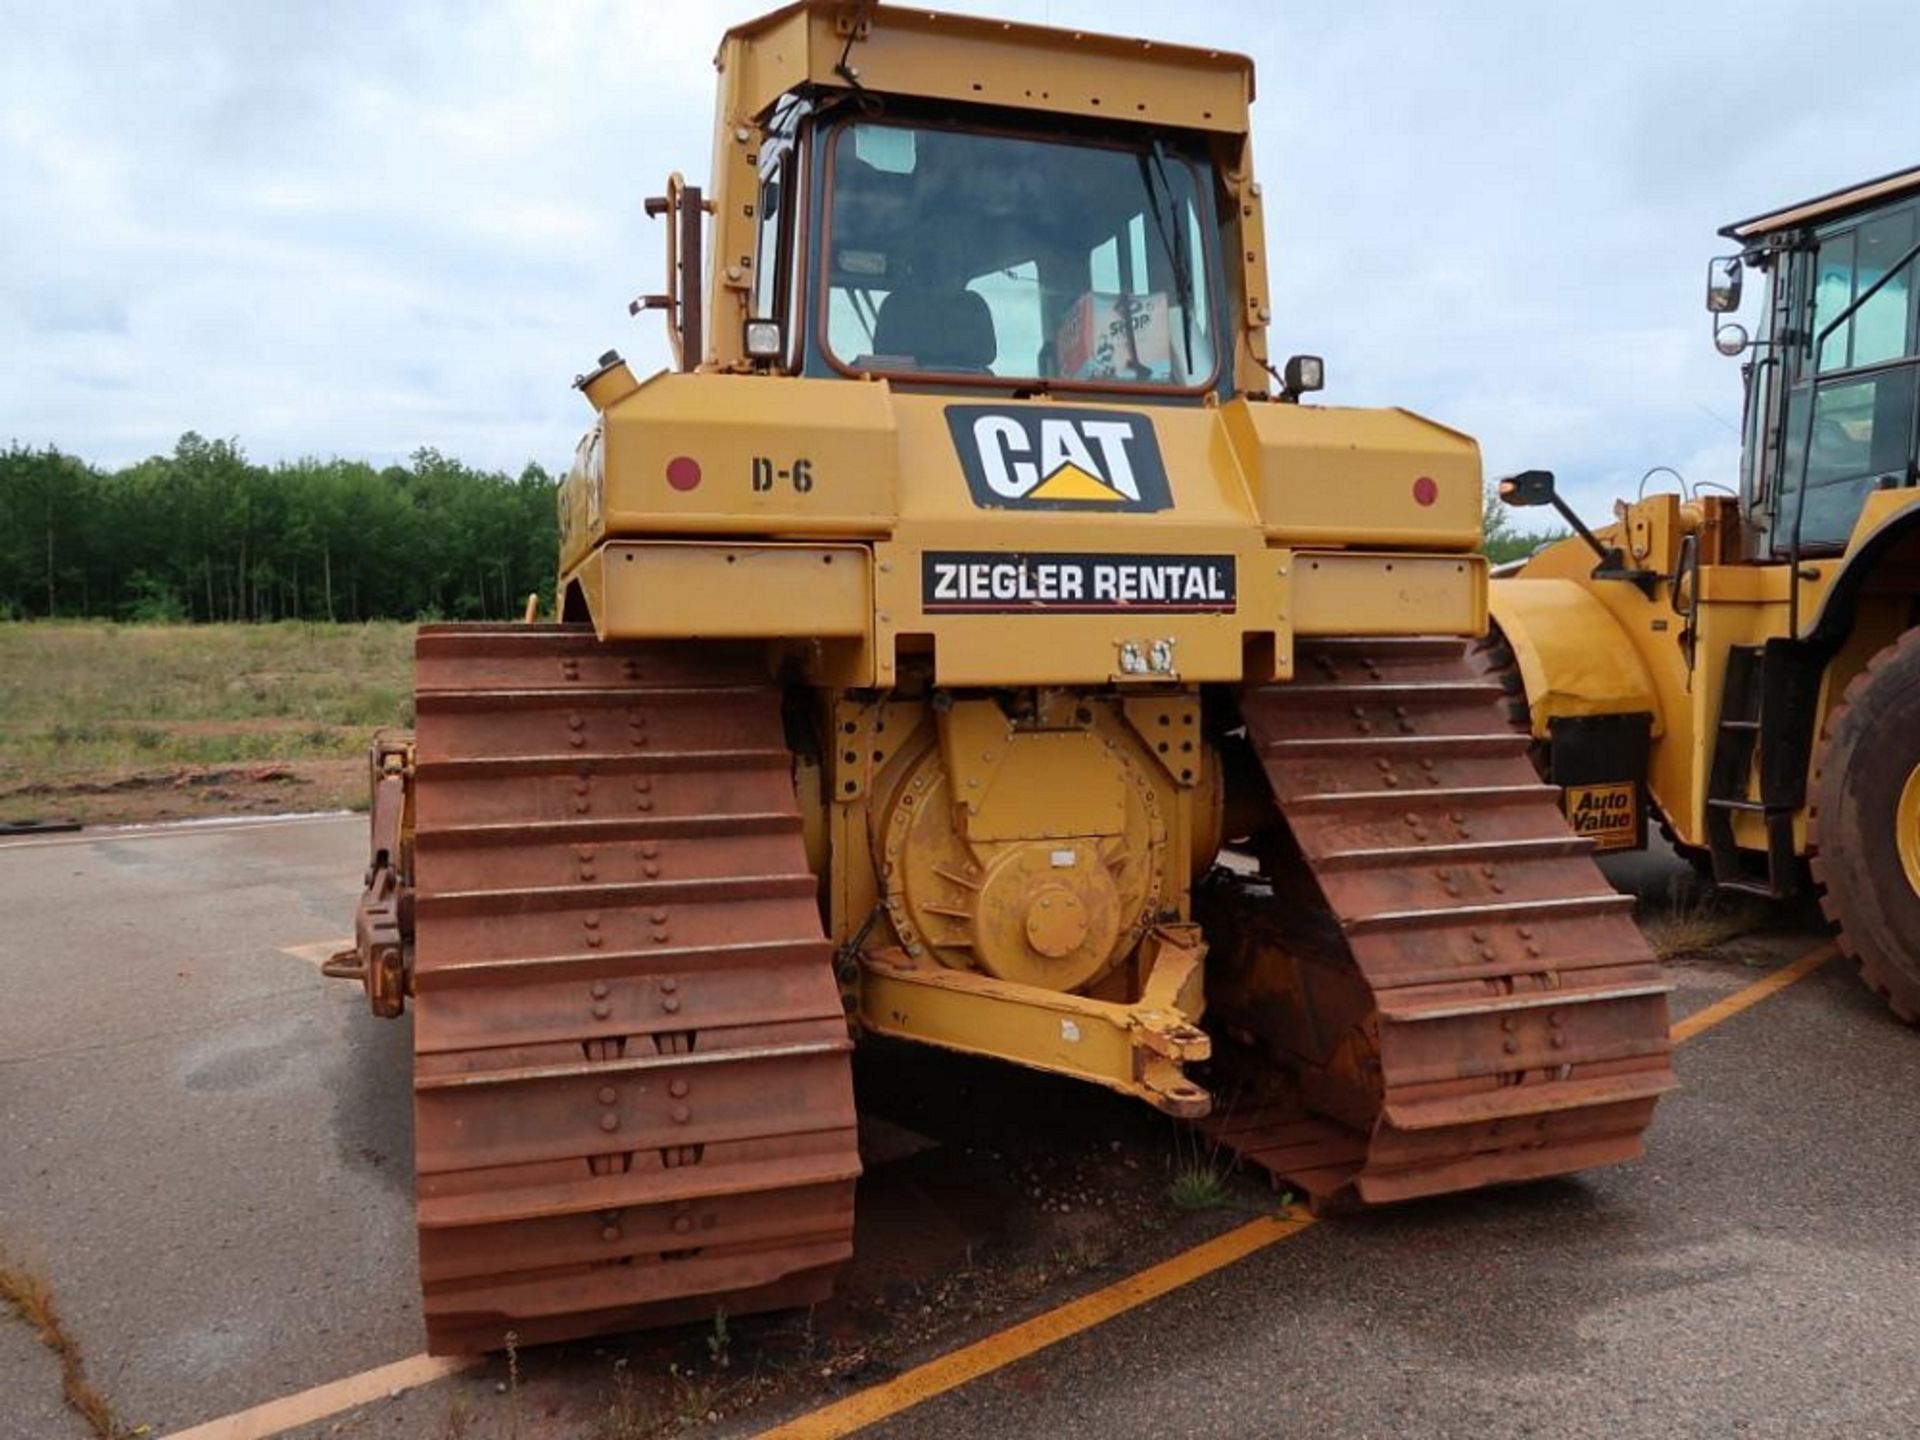 Caterpillar D6T Crawler Tractor, S/N KZJB00246, EROP, 153 in. Blade, 13,760 hours indicated - Image 3 of 5